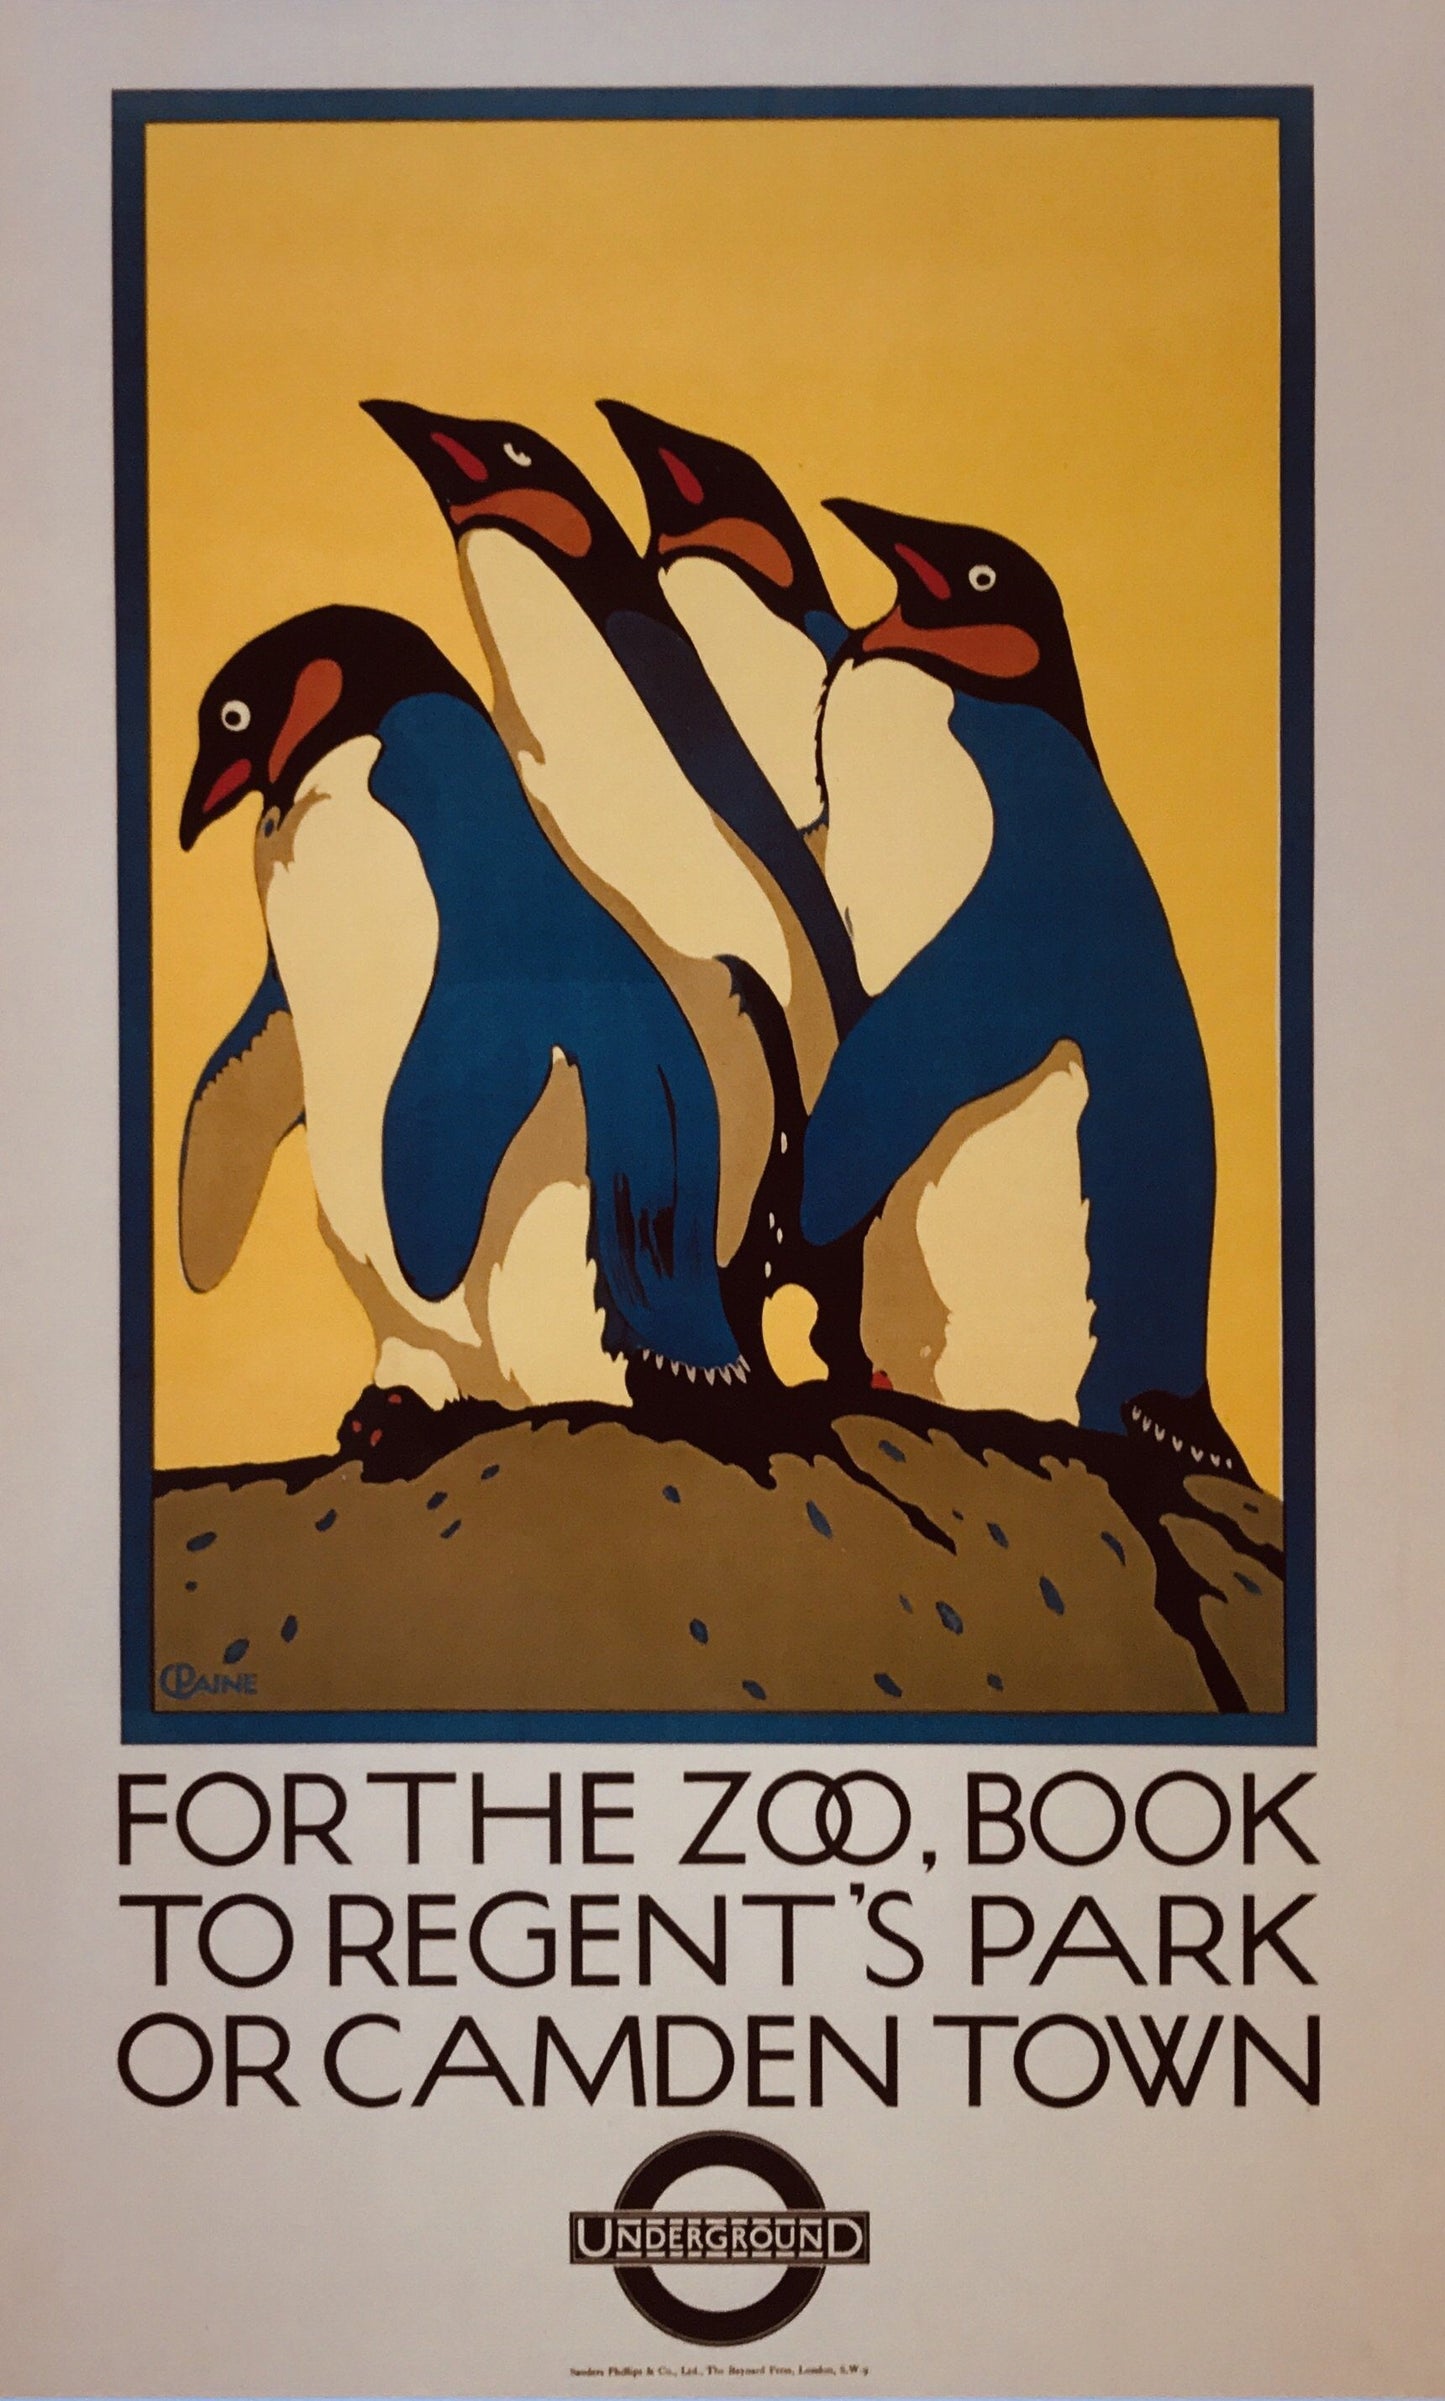 "For the Zoo" London Underground Posters (1920s) | Vintage travel posters | Charles Paine Posters, Prints, & Visual Artwork The Trumpet Shop   